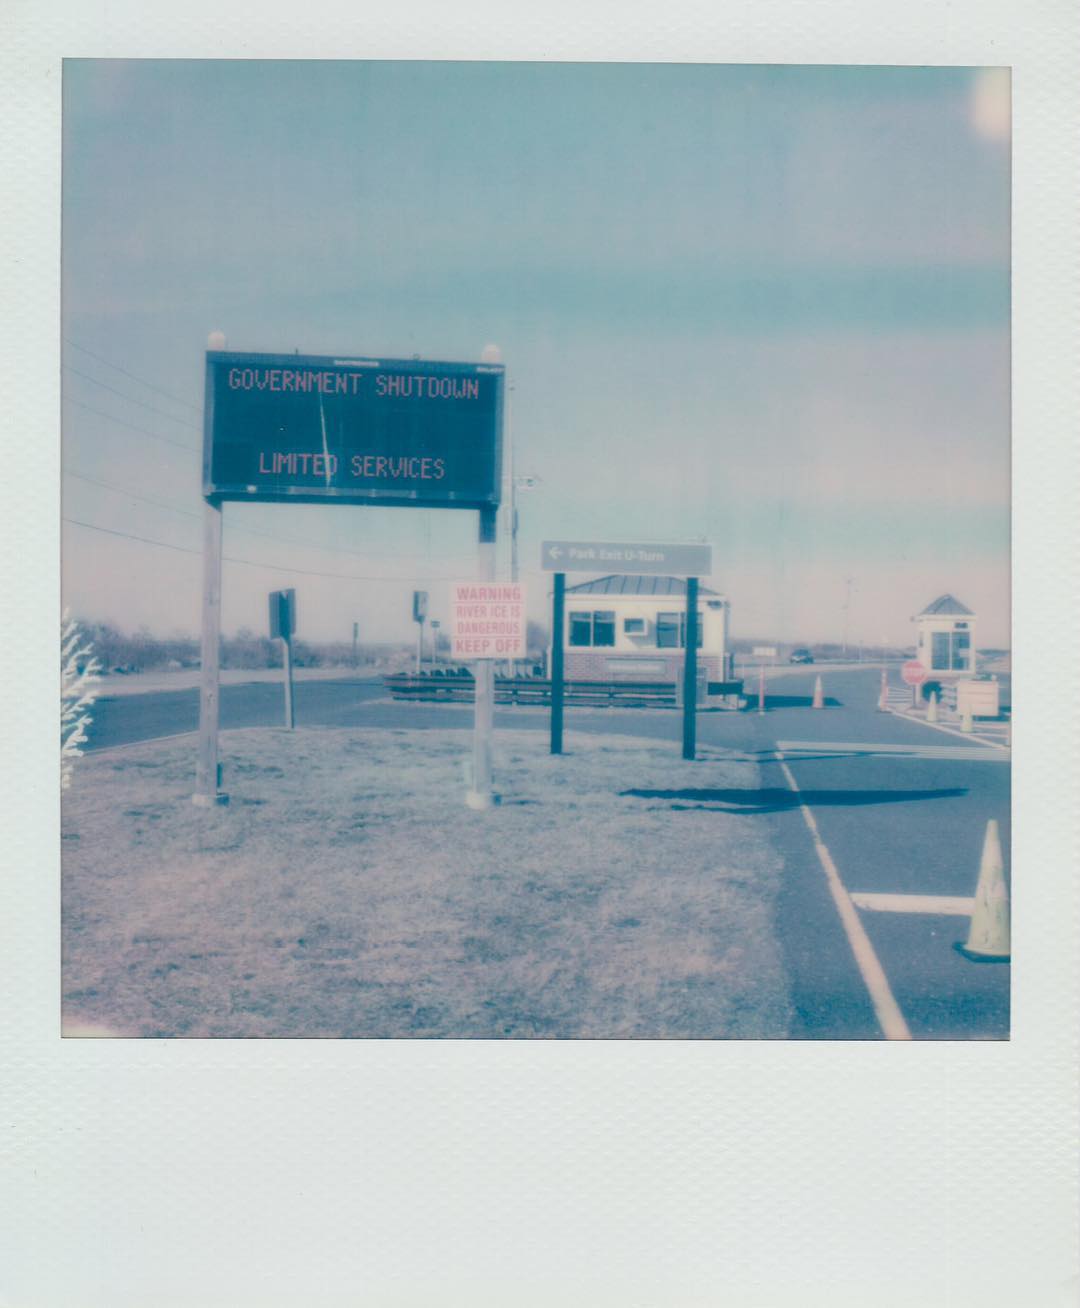 Shot this one a while ago. Scanned today as part of preparation for Polaroid Week, starting this Sunday. #polaroid #polaroidoriginals #slr680 #film #filmphotography #roidweek